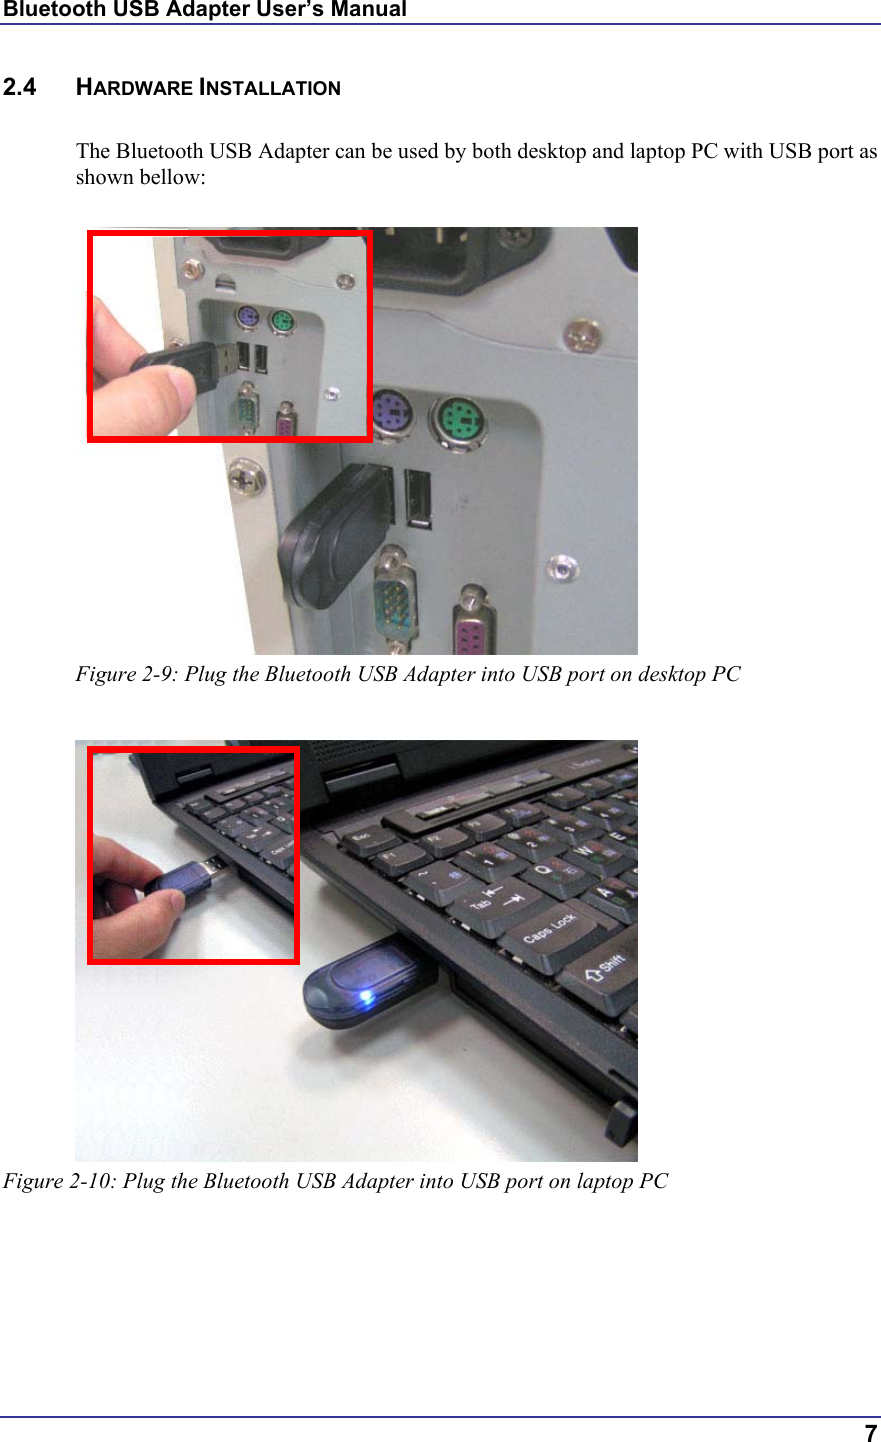 Bluetooth USB Adapter User’s Manual  7 2.4 HARDWARE INSTALLATION  The Bluetooth USB Adapter can be used by both desktop and laptop PC with USB port as shown bellow:   Figure 2-9: Plug the Bluetooth USB Adapter into USB port on desktop PC   Figure 2-10: Plug the Bluetooth USB Adapter into USB port on laptop PC 